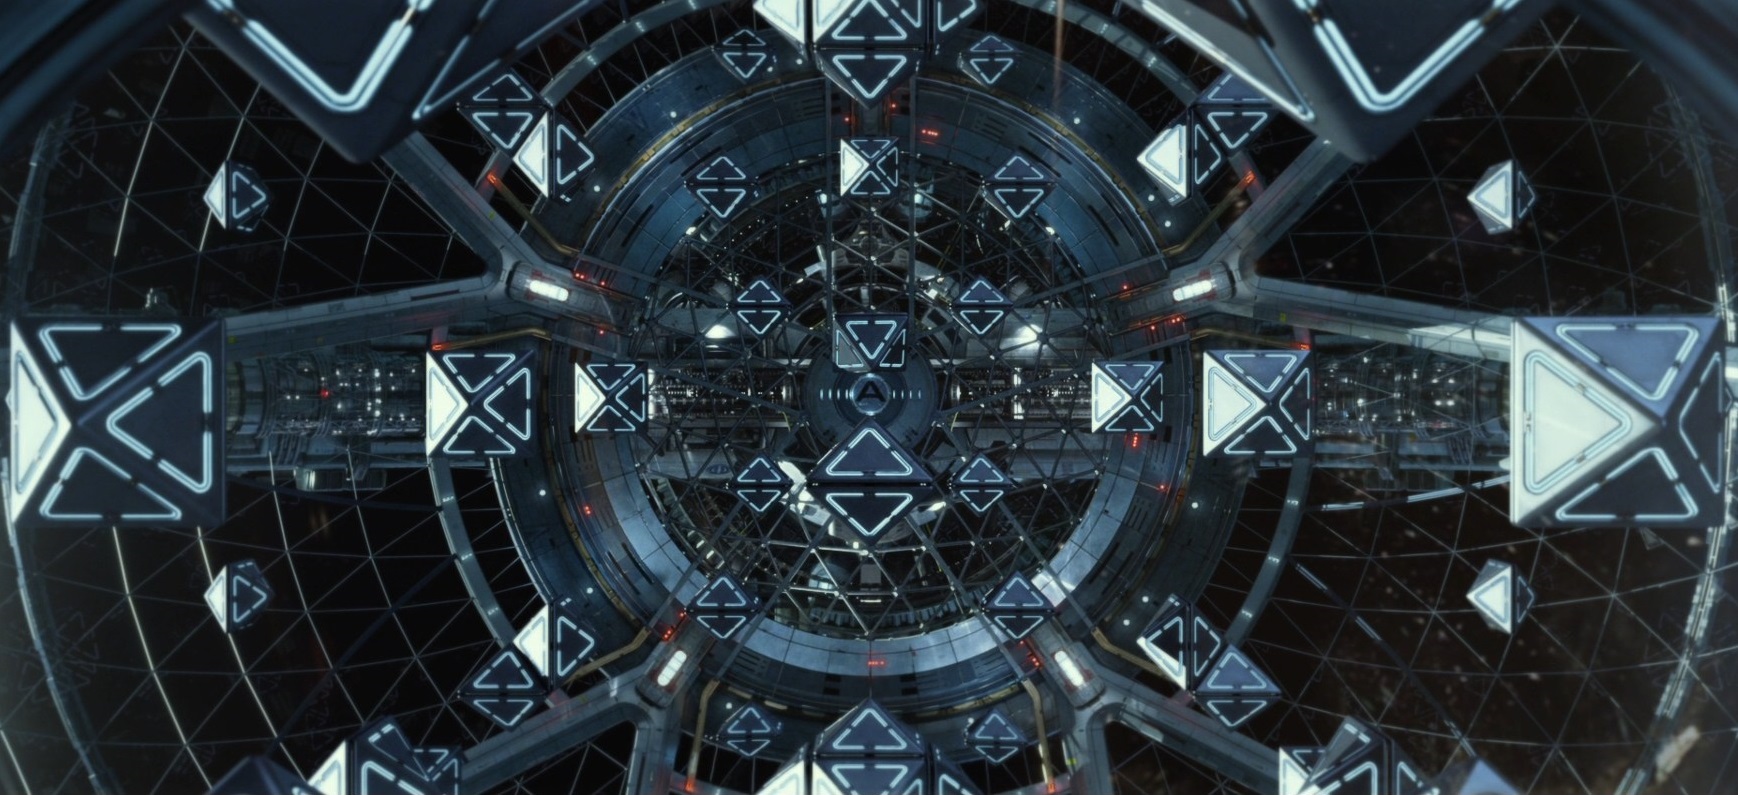 Visual effects from the Ender's Game film showing the zero-gravity battle room.